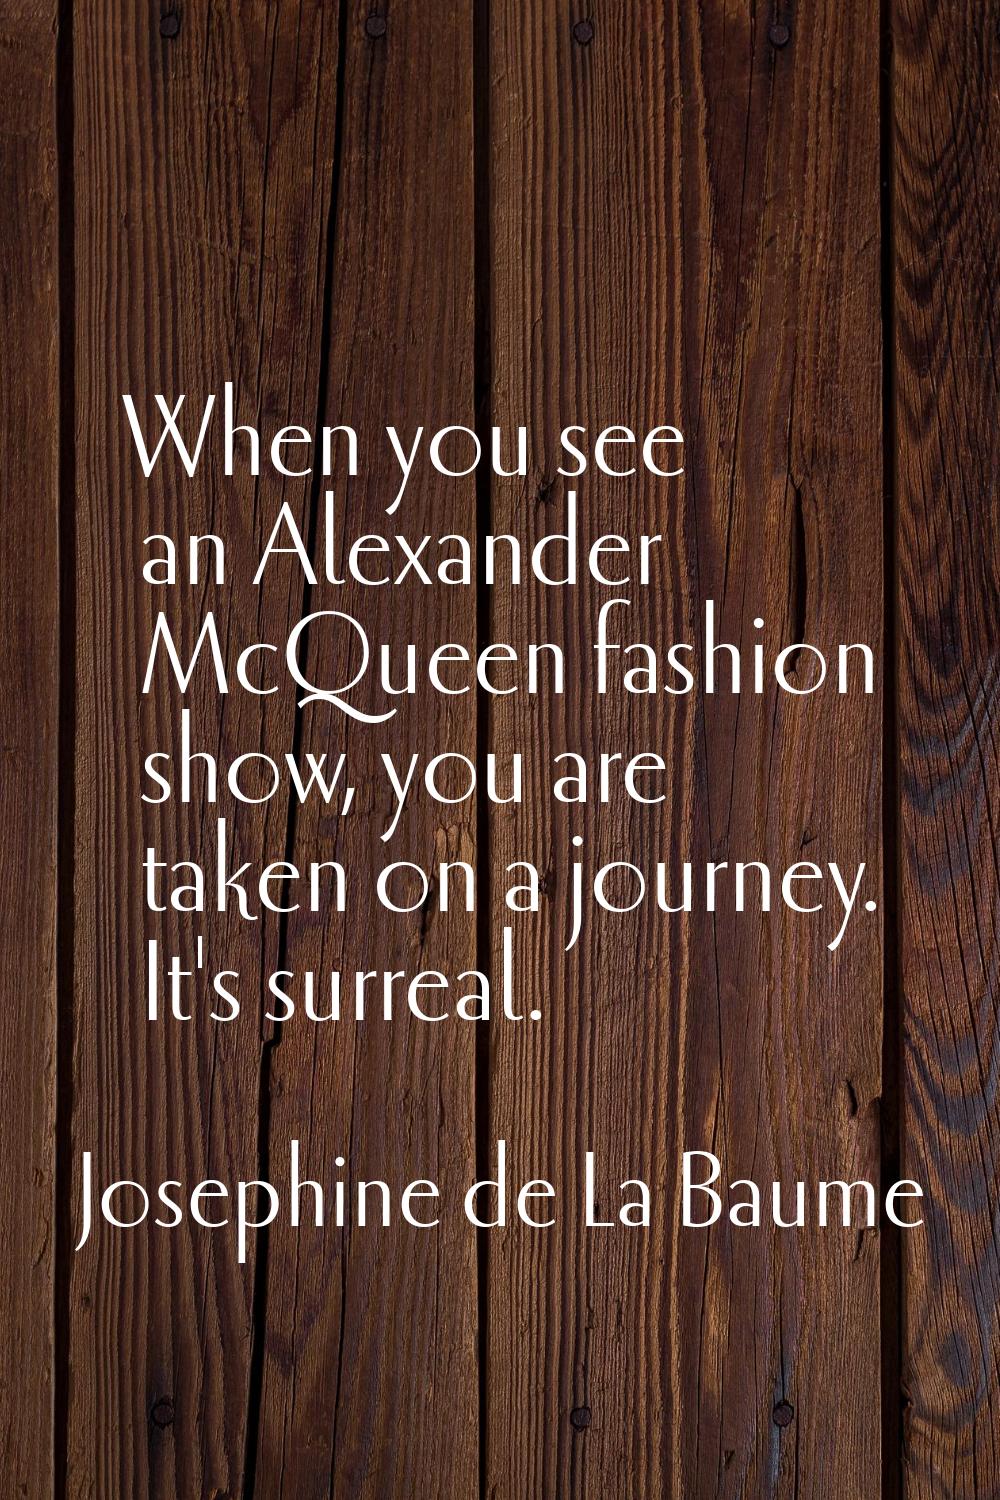 When you see an Alexander McQueen fashion show, you are taken on a journey. It's surreal.